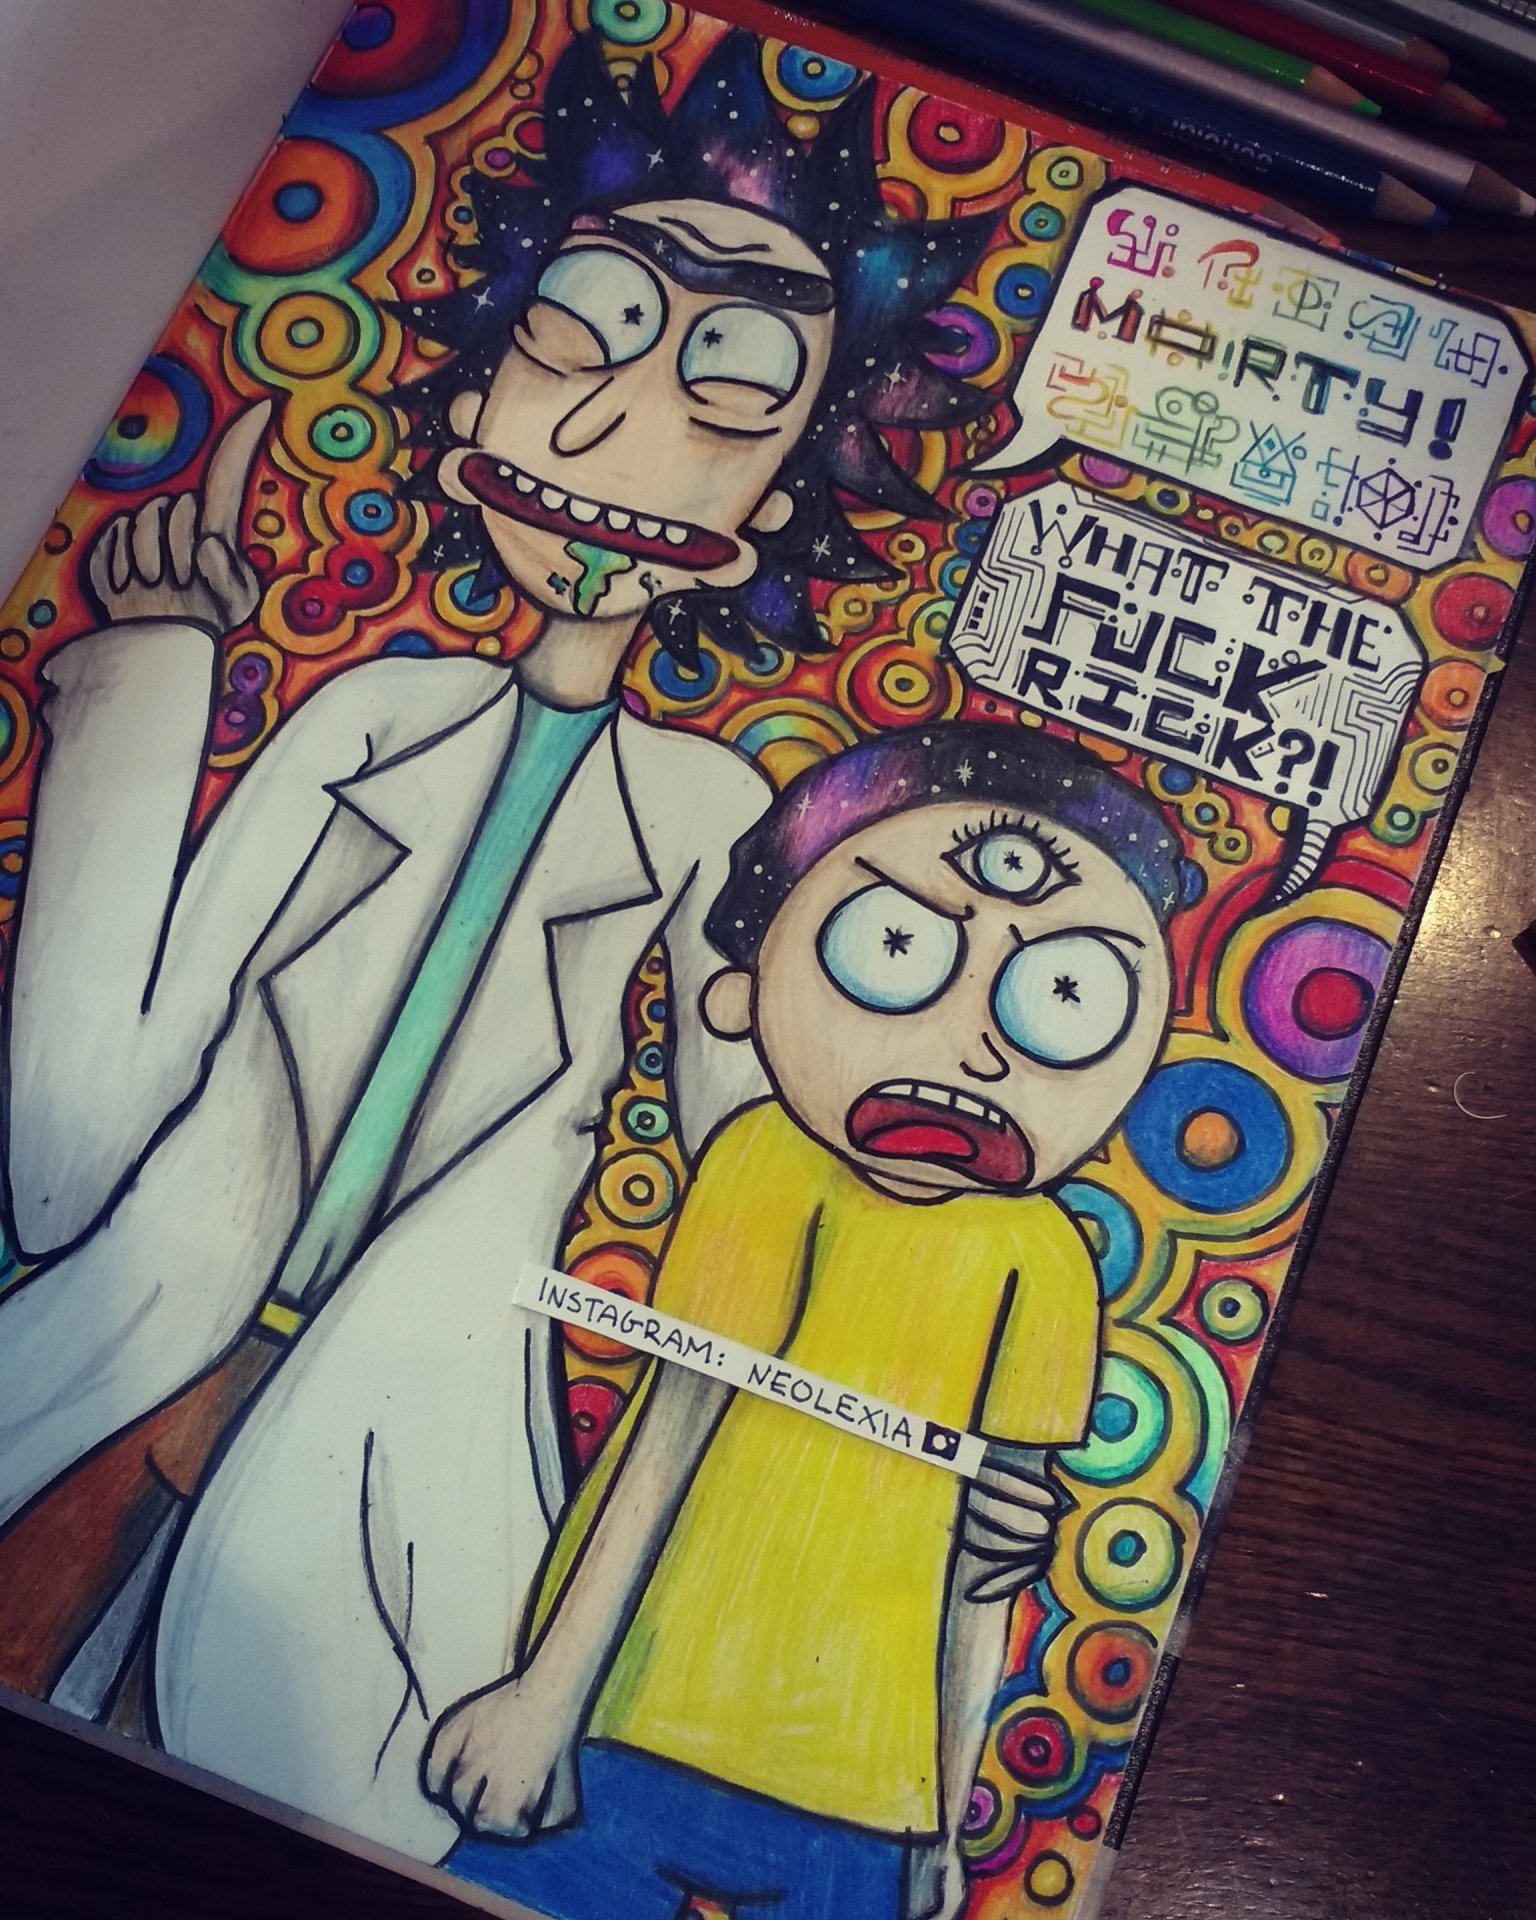 Check out my friend's trippy Rick and Morty art! : woahdude